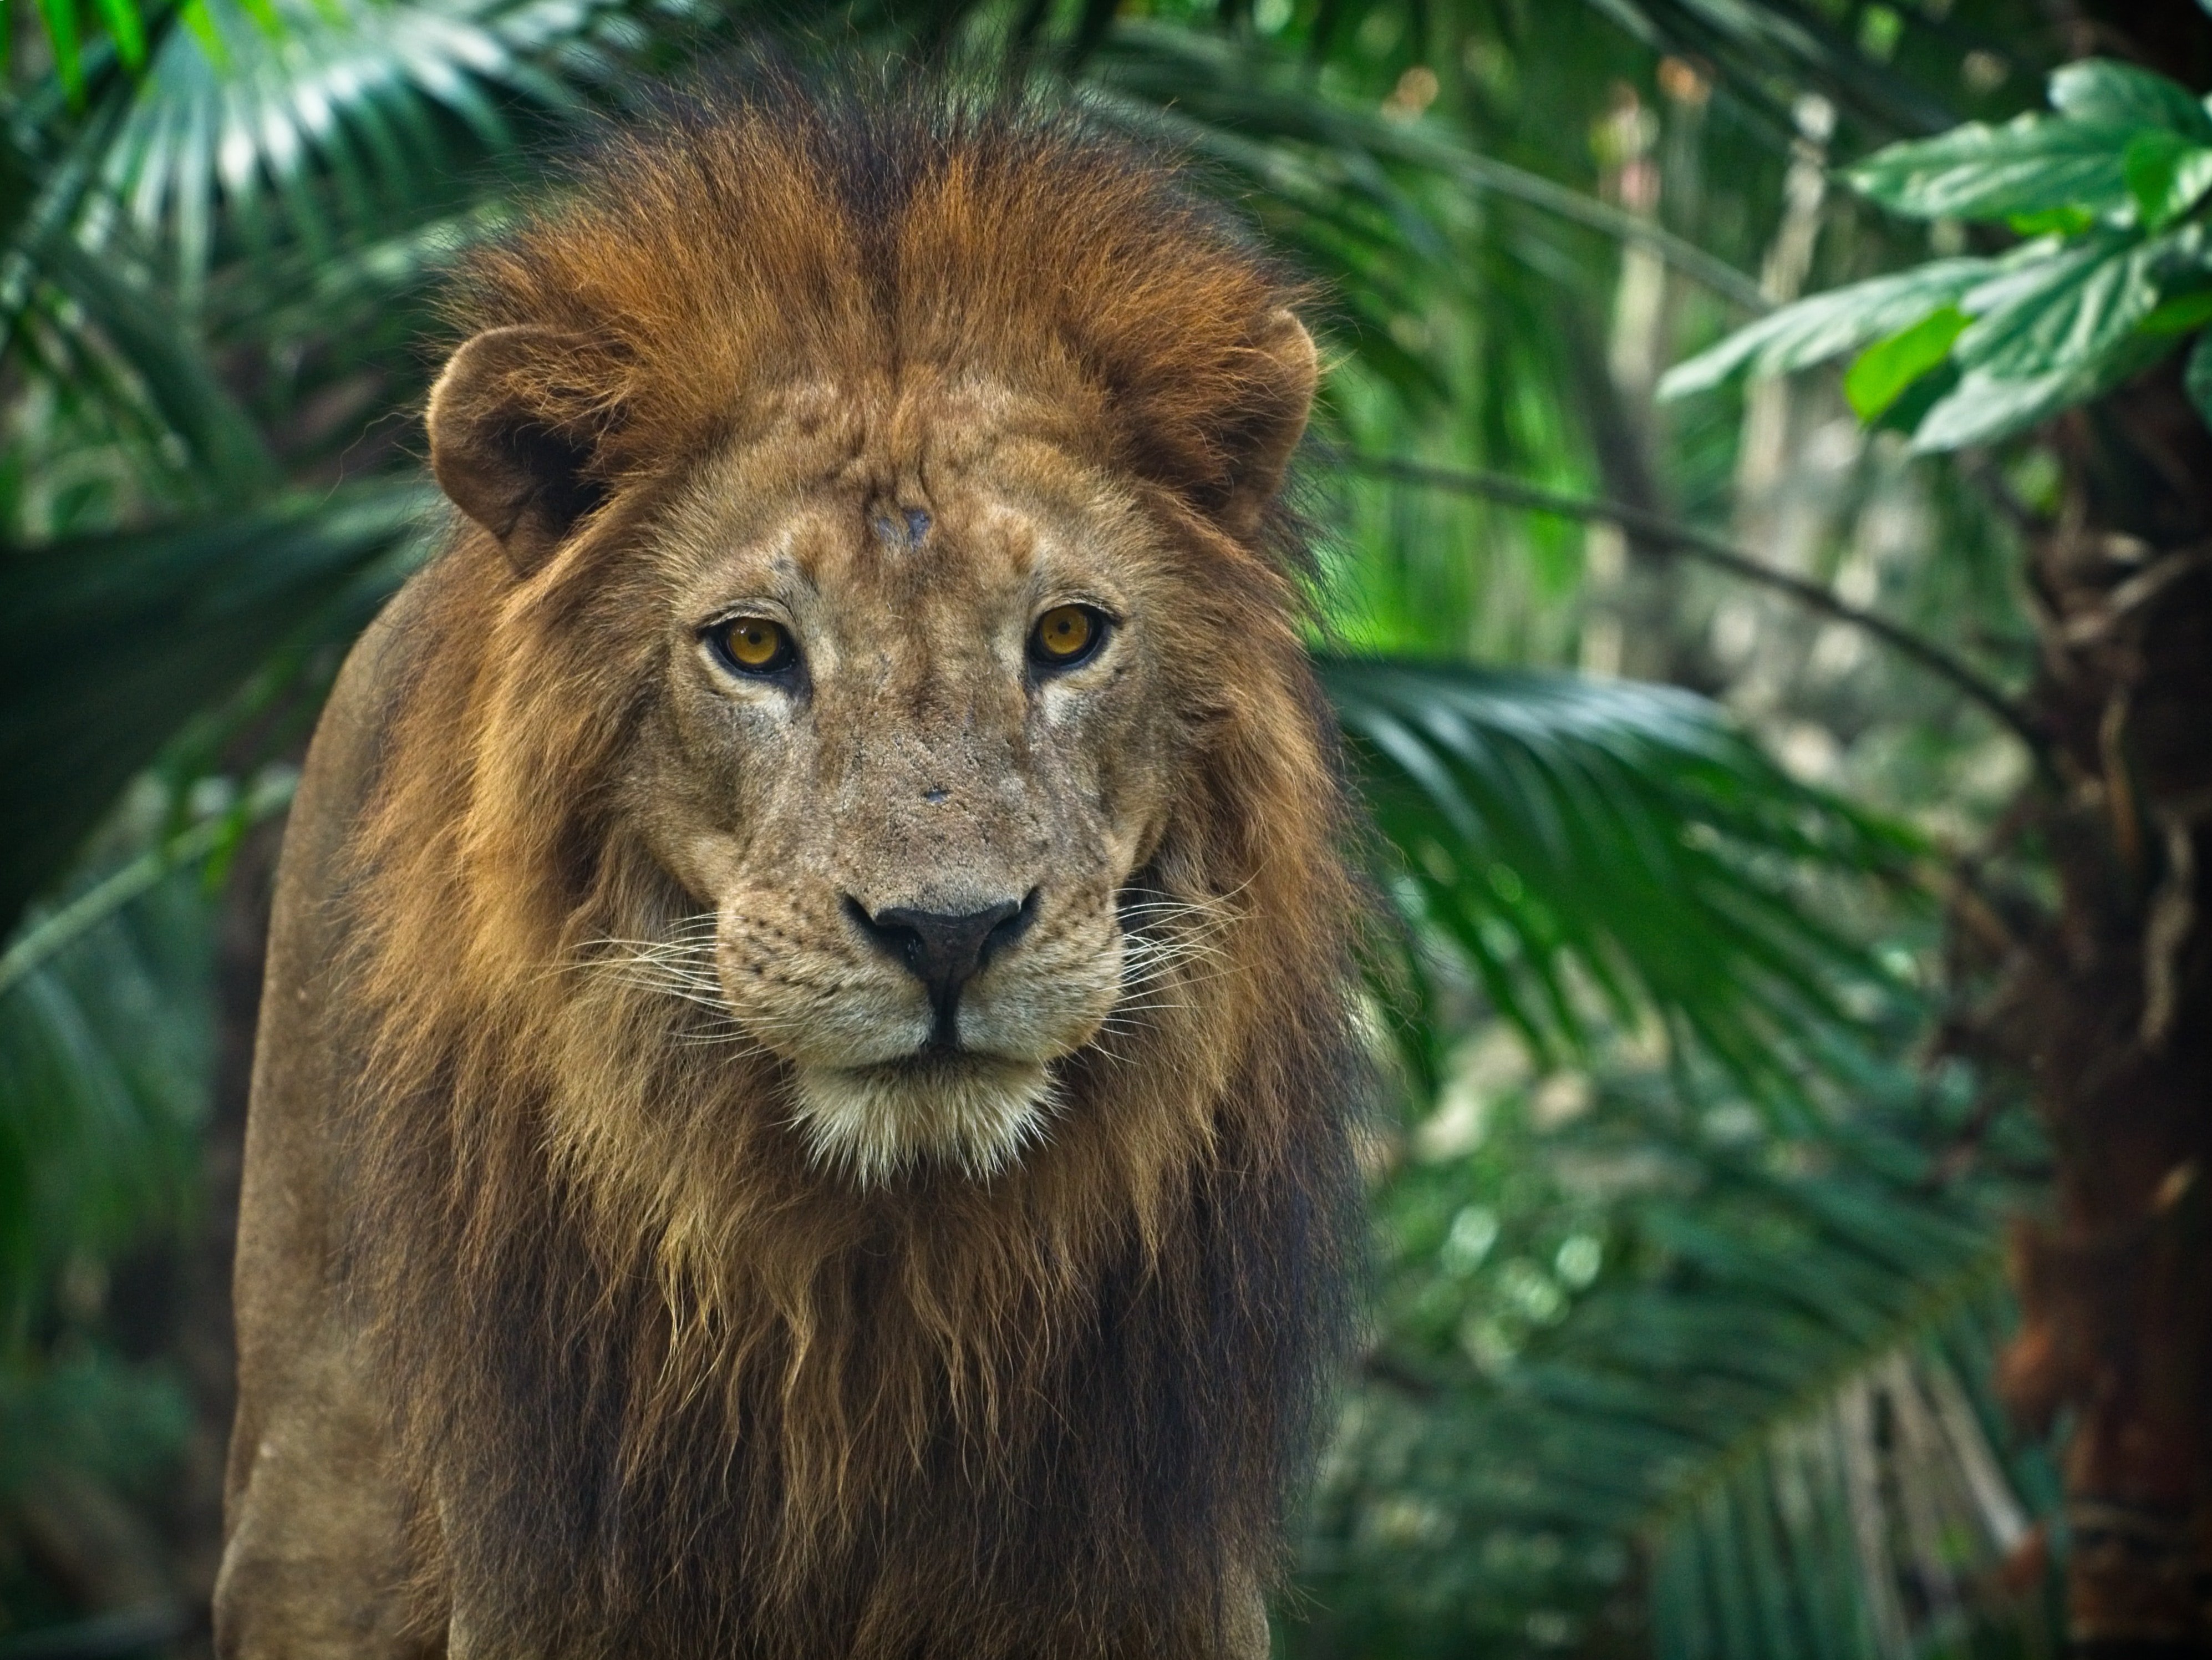 Photo of a lion in the jungle | Photo: Pexels